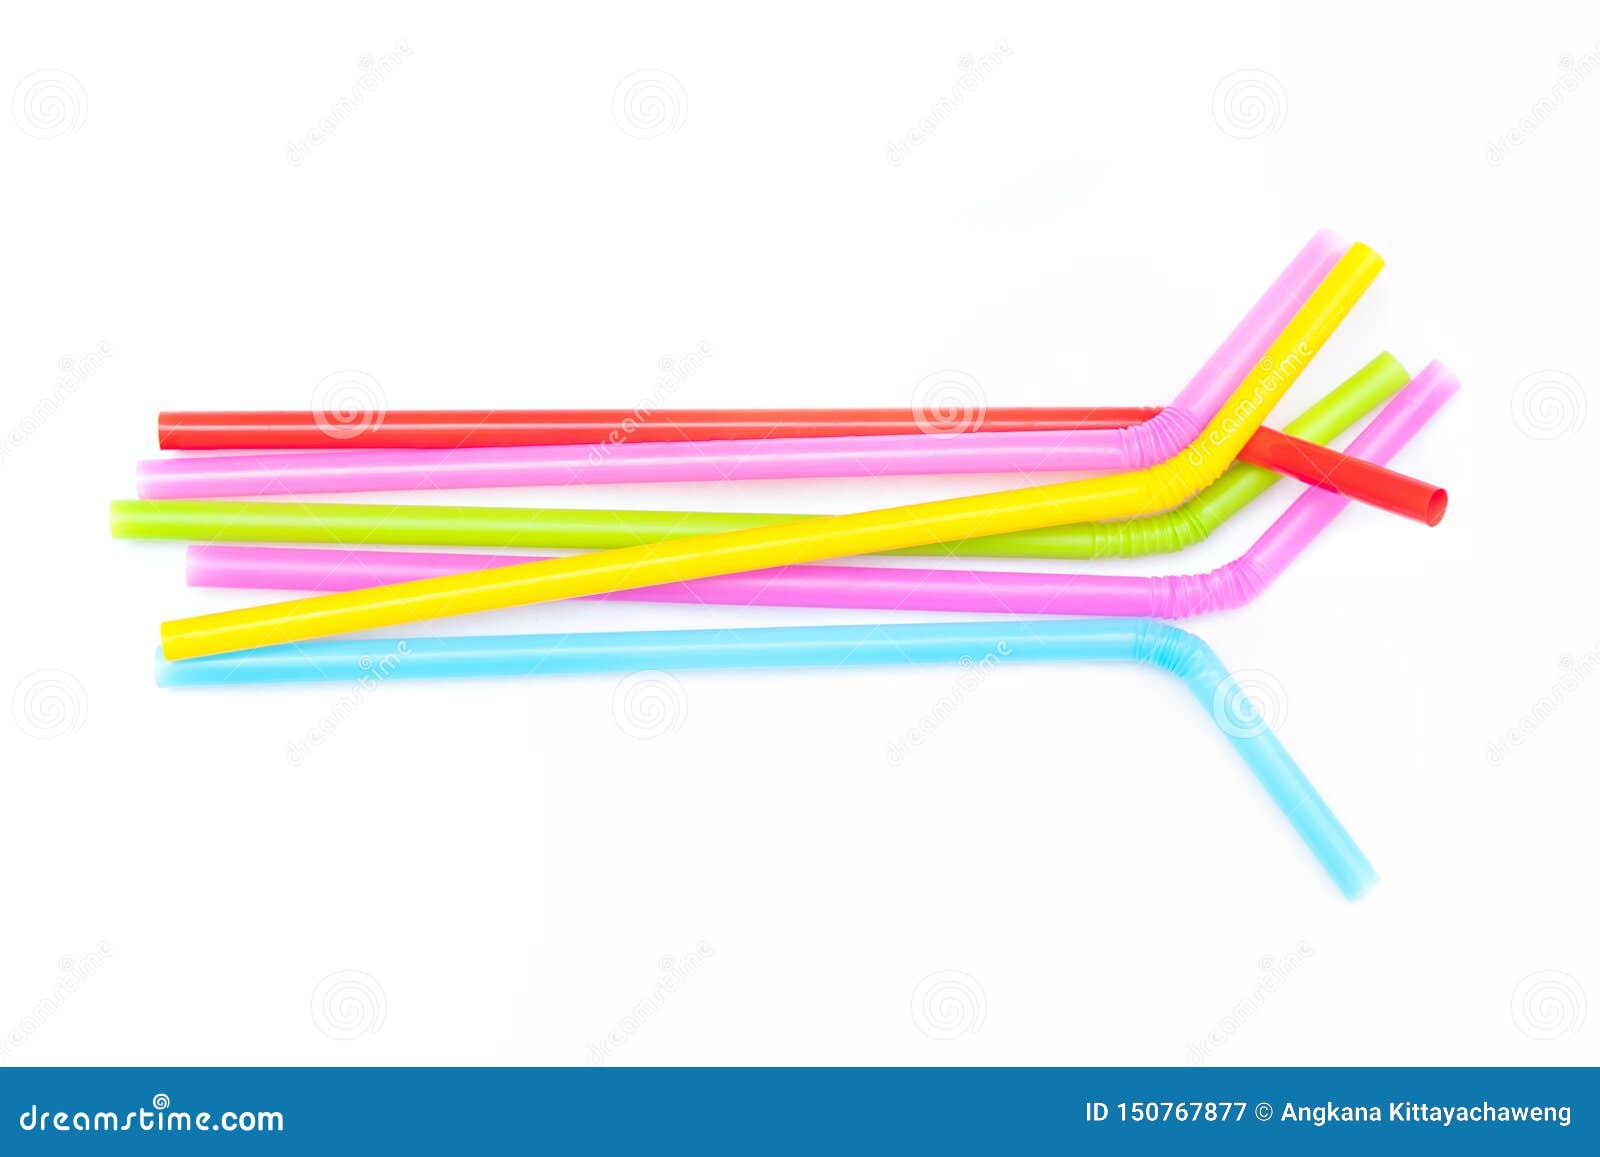 pile of colorful plastic drinking straws  on white background.